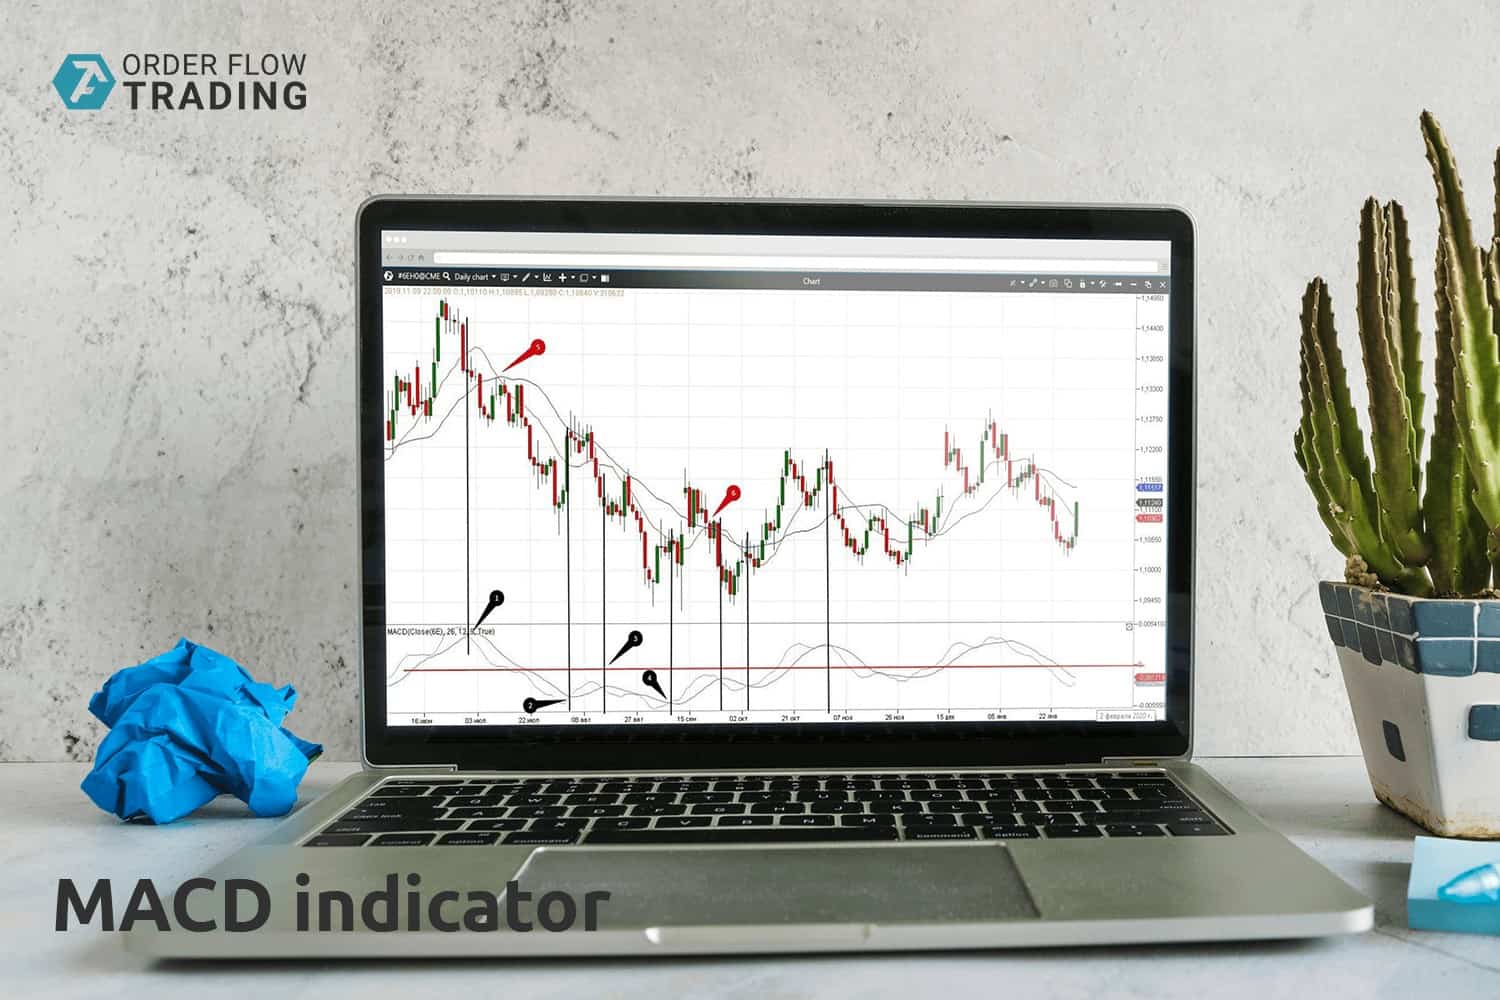 Is it possible to combine the MACD indicator with the volume analysis?